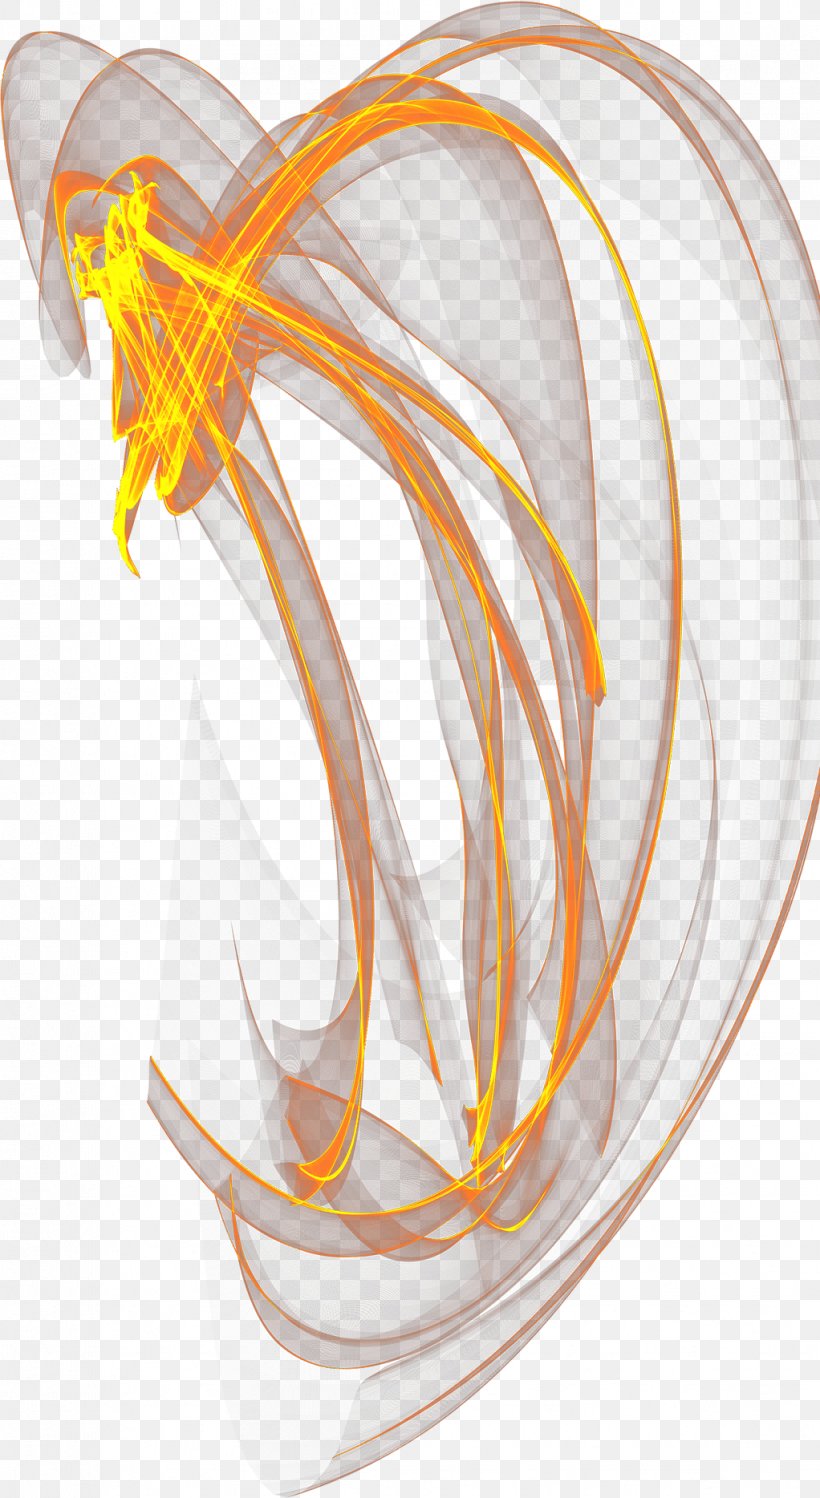 Flame Image Design Vector Graphics, PNG, 1022x1868px, Flame, Cdr, Fire, Orange Download Free